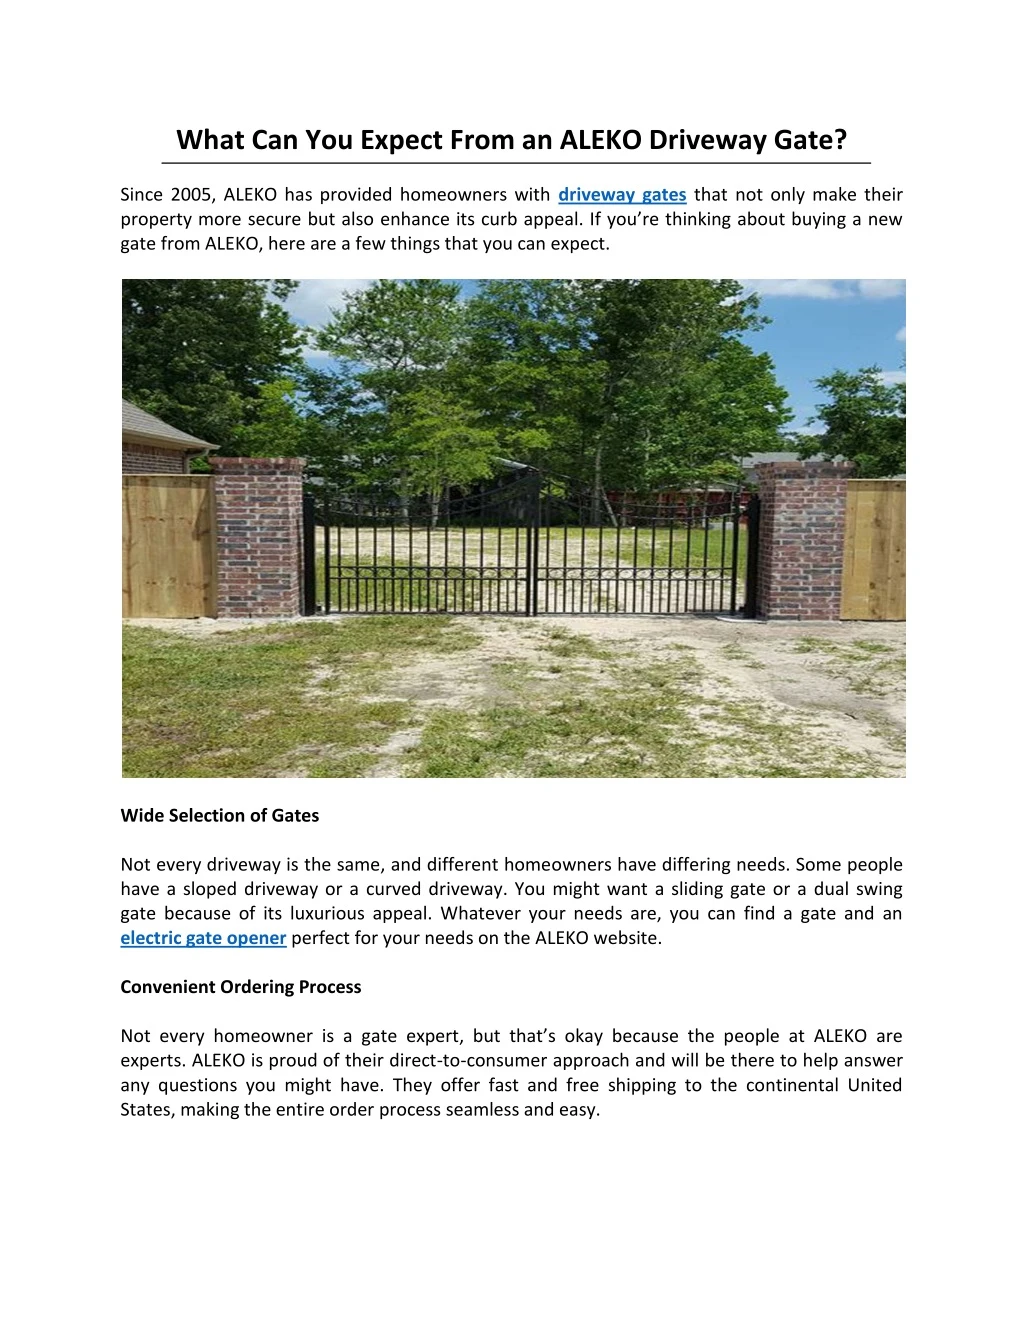 what can you expect from an aleko driveway gate